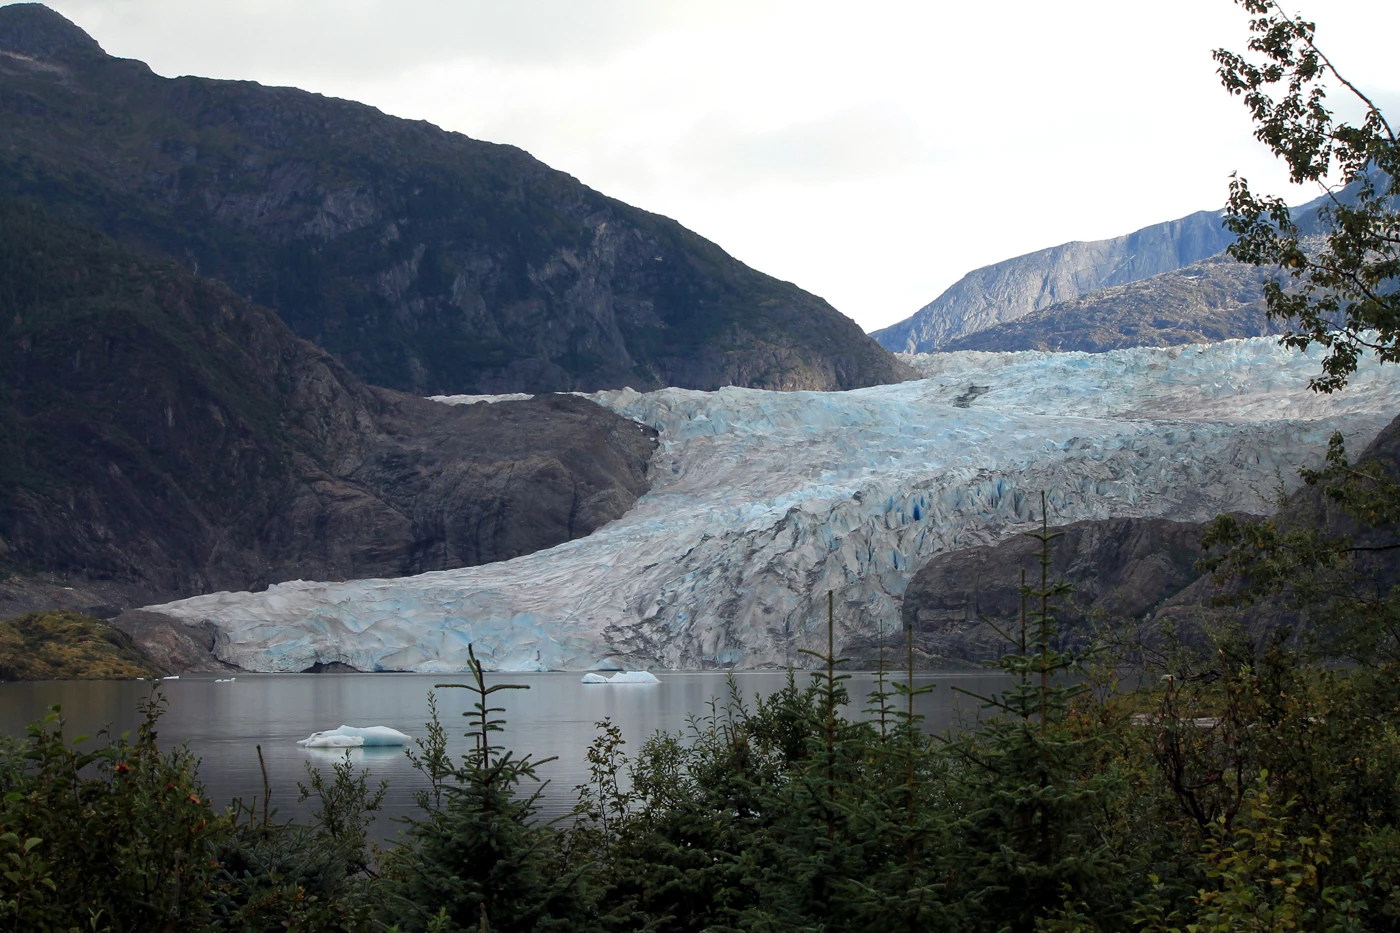 The Mendenhall Glacier spilling out between mountains into a lake below